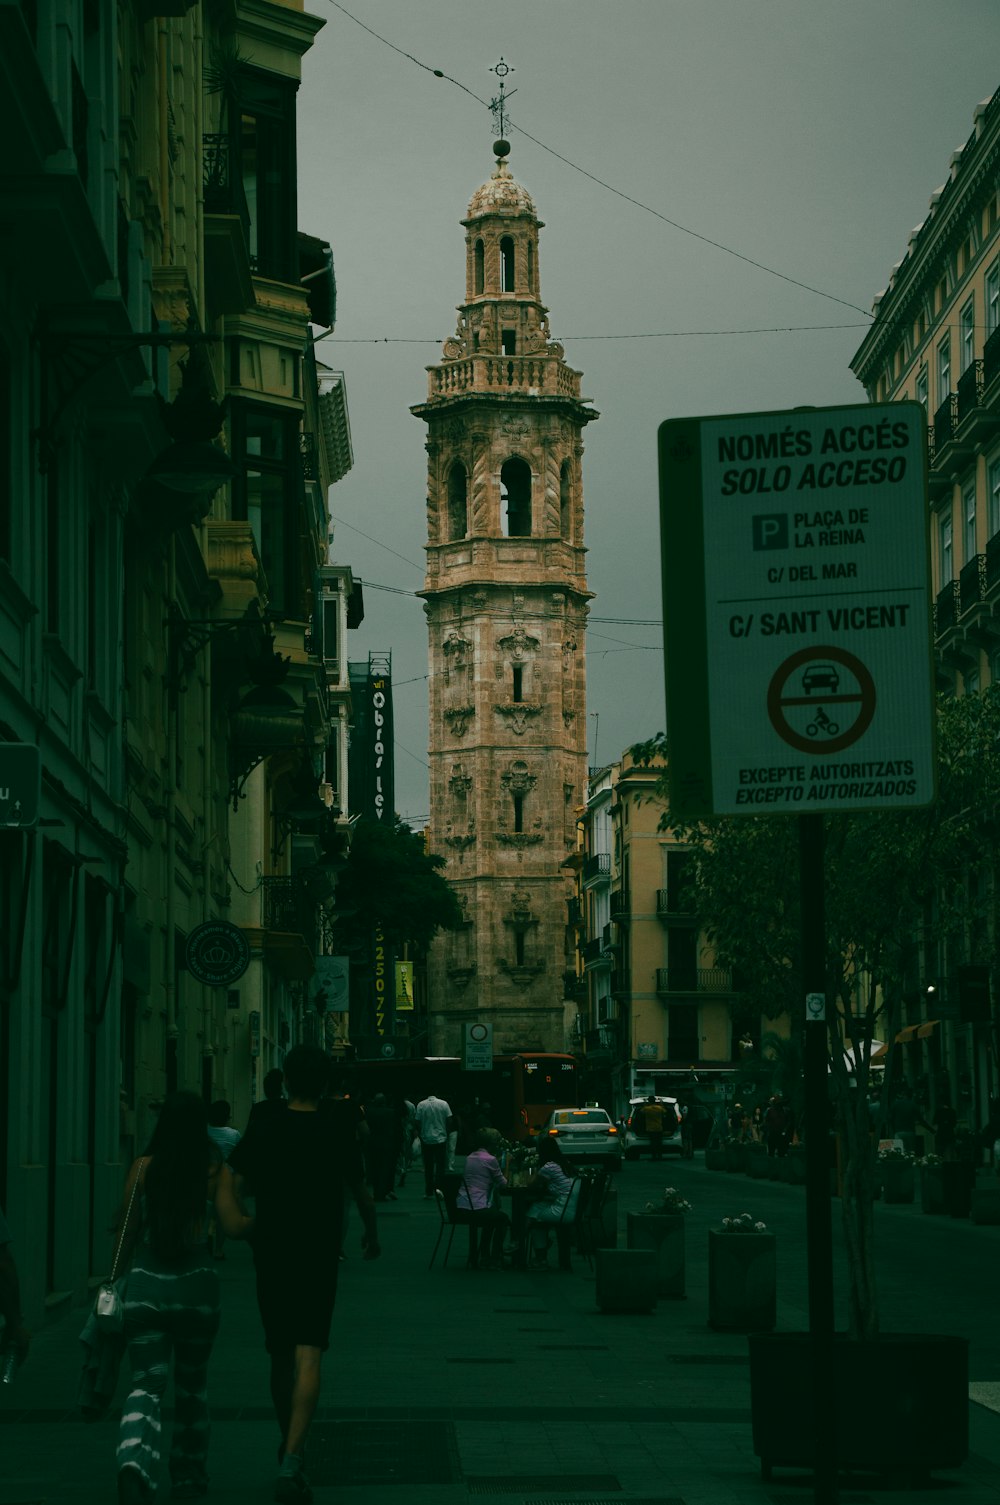 a tall clock tower towering over a city street